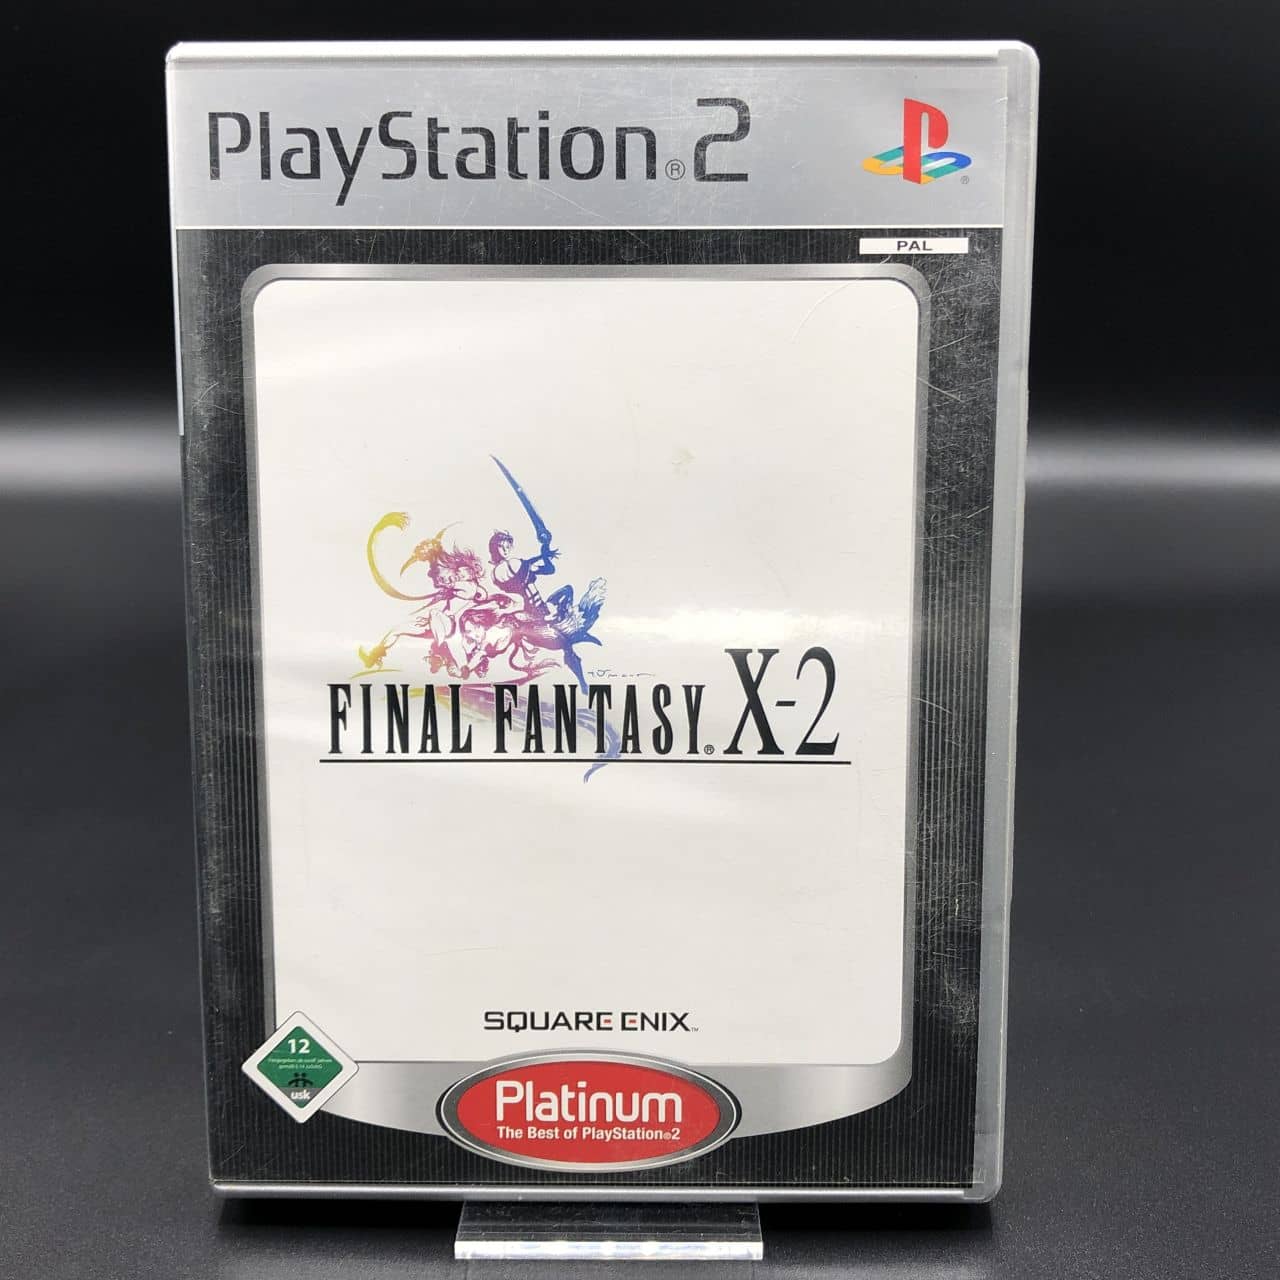 PS2 Final Fantasy X-2 (Platinum) (ohne Anleitung) (Sehr gut) Sony PlayStation 2